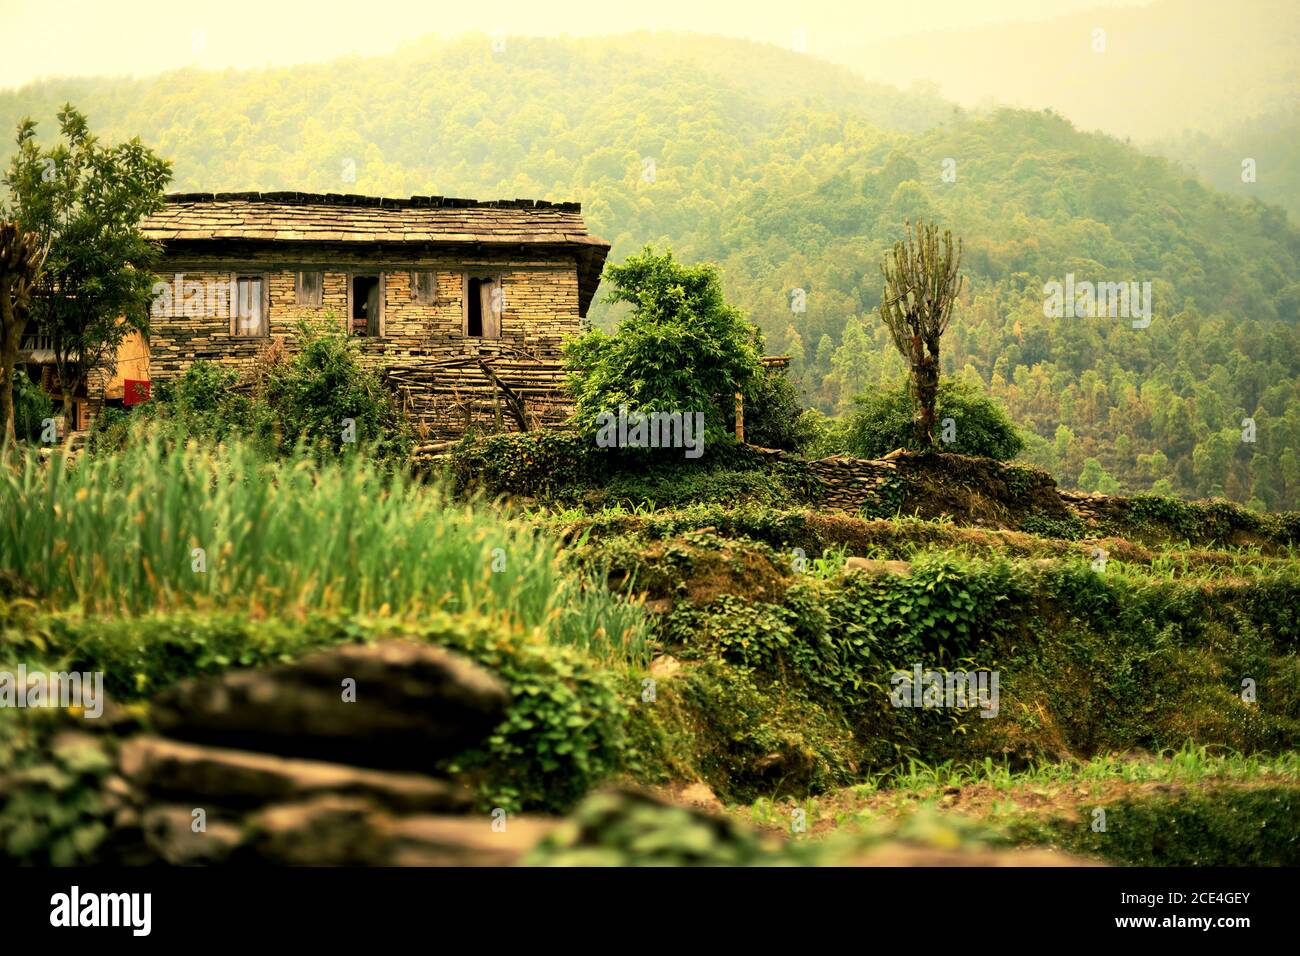 A farmer's house in the agricultural village of Sidhane on Panchase mountain region, Nepal, where the locals also rely on ecotourism. Stock Photo